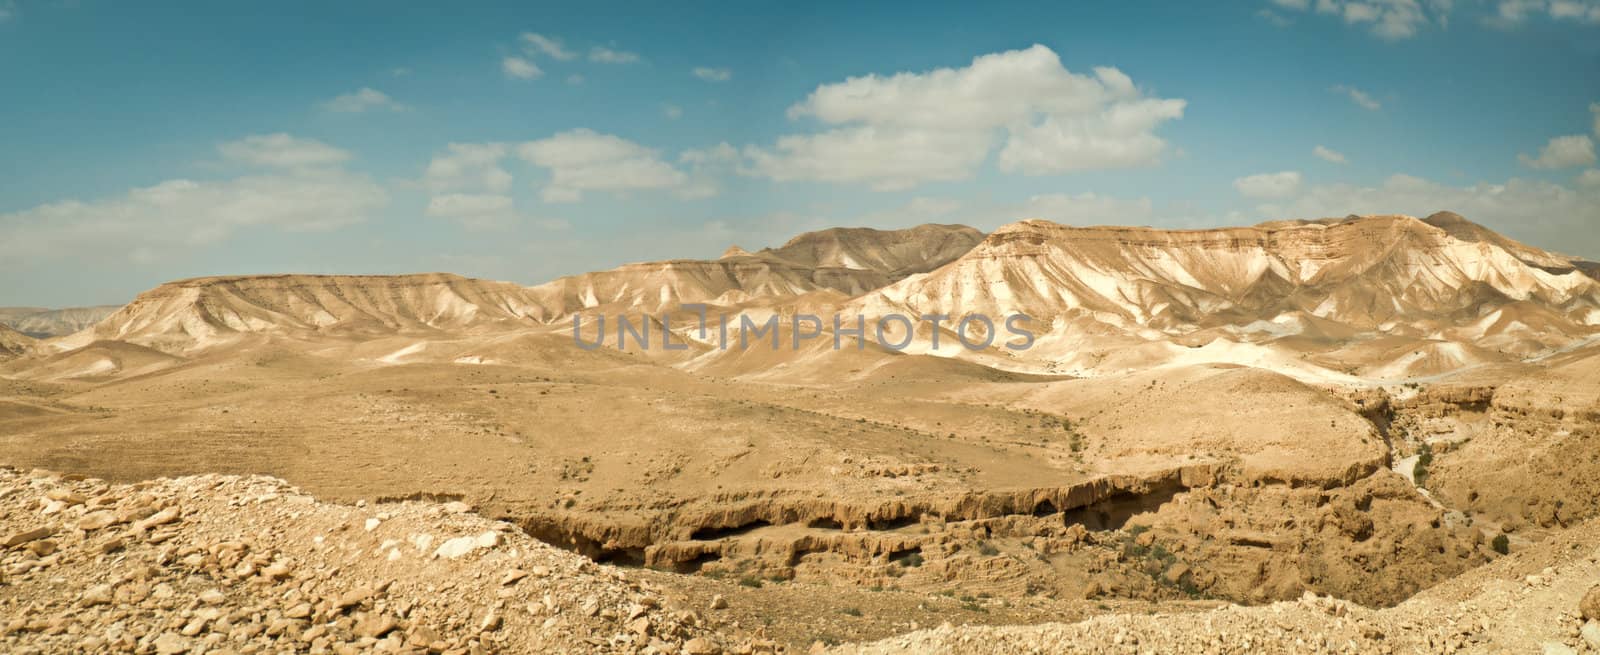 Judean Desert, under the scorching rays of the sun. Israel. Spring.